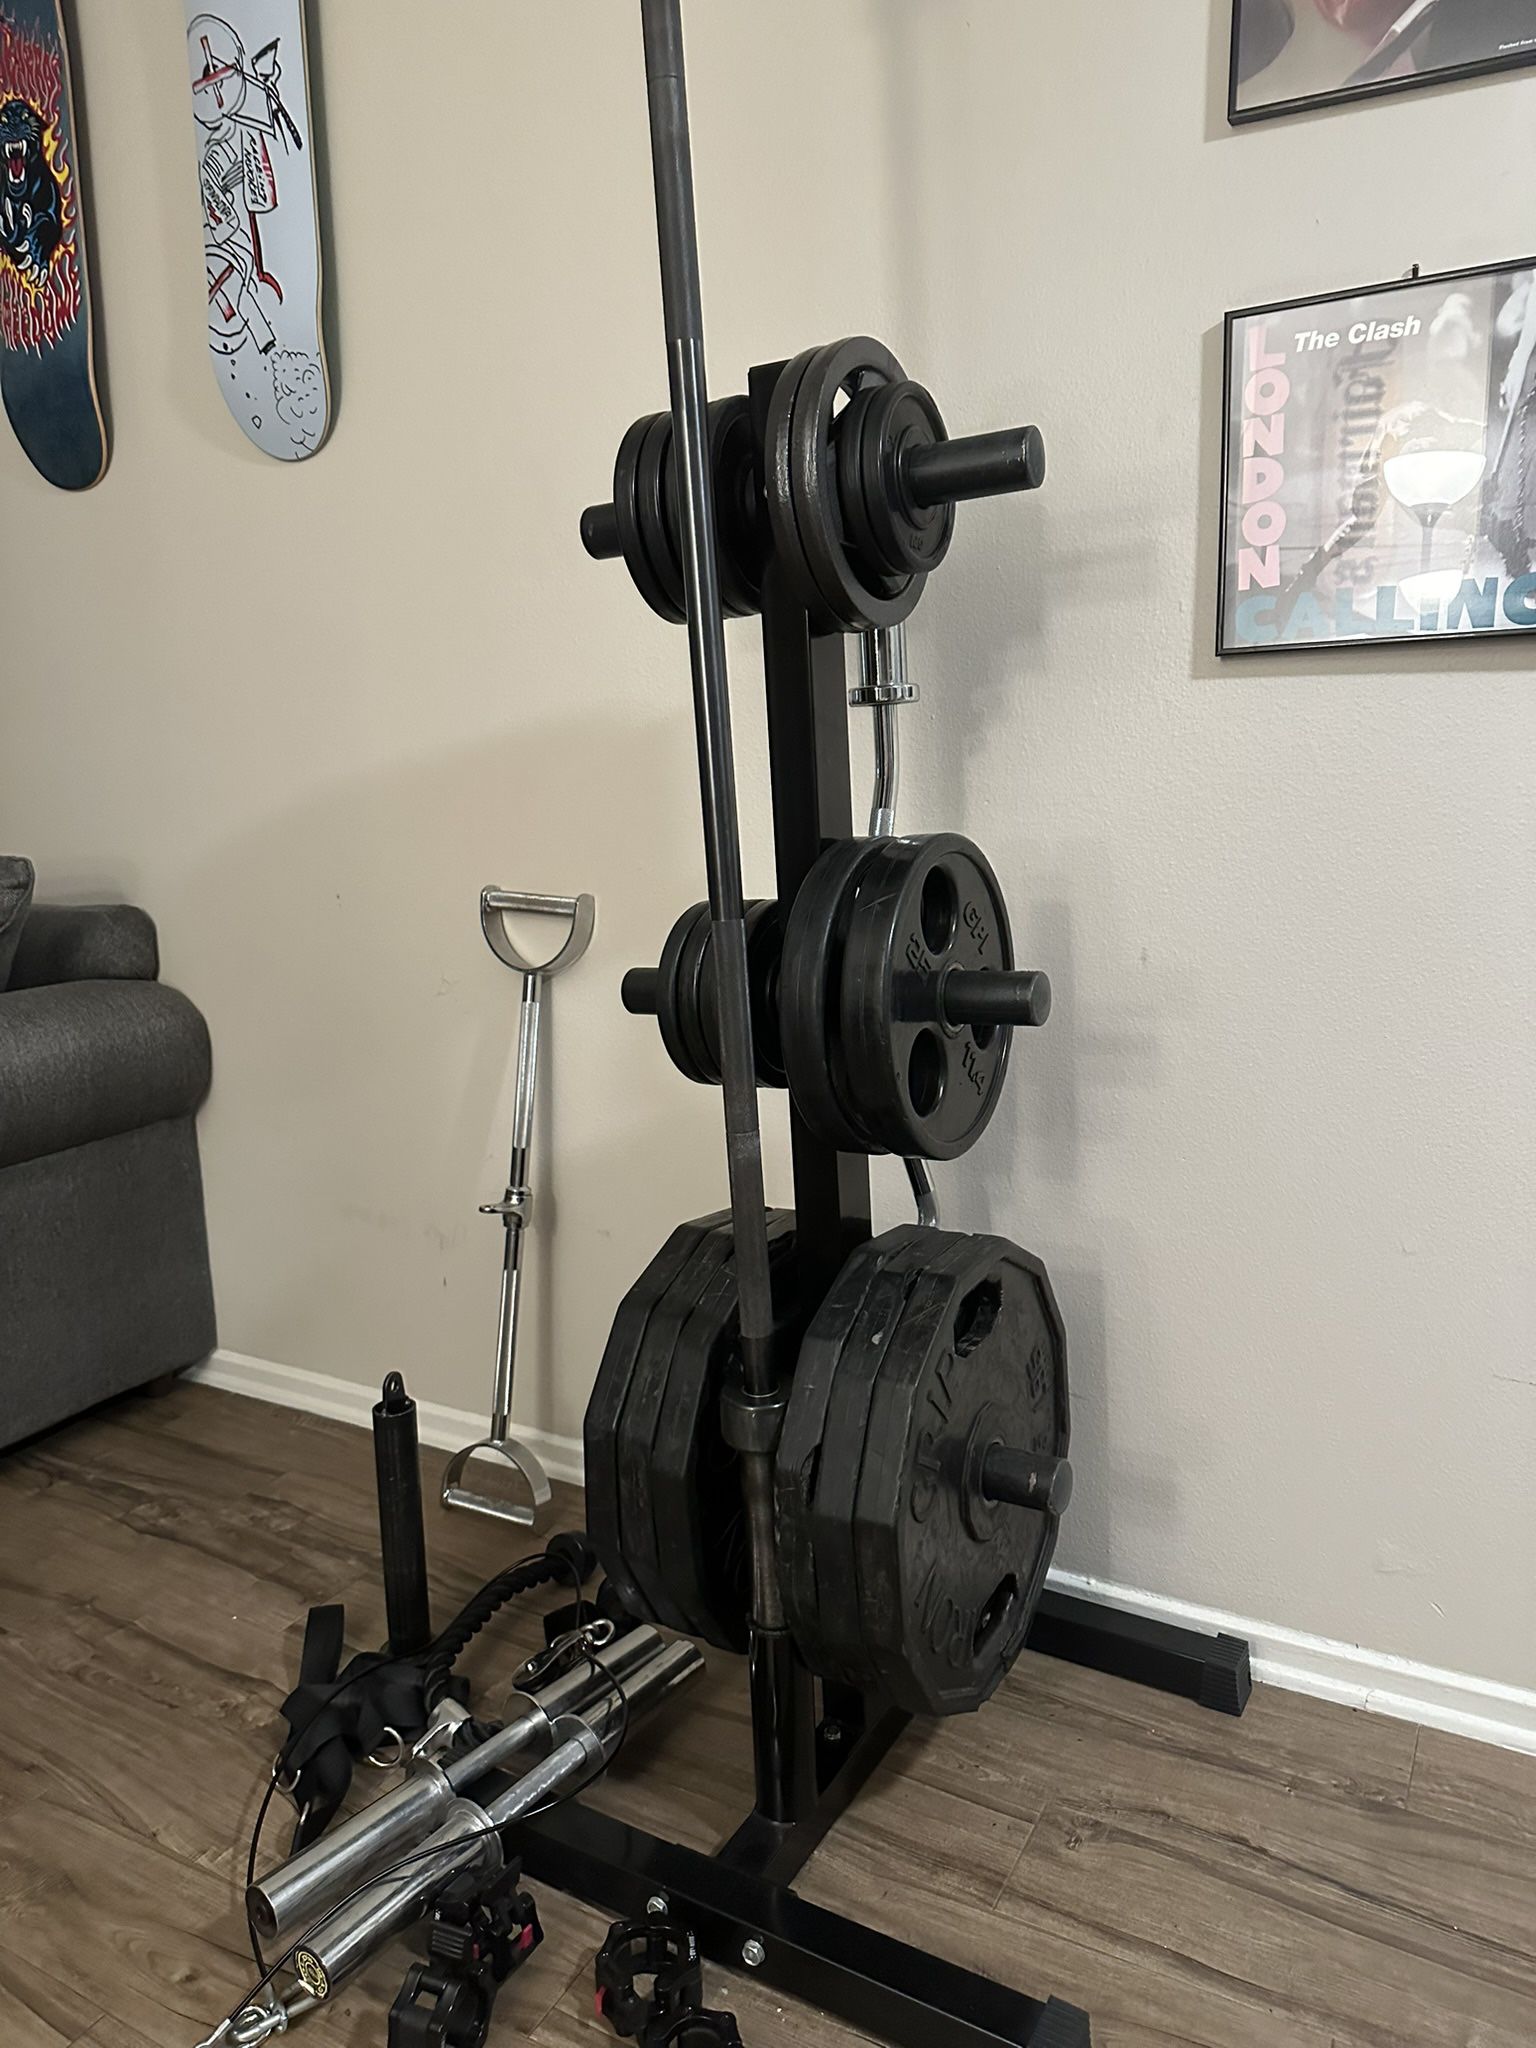 Wright set (385lbs), barbell, curl bar, weight tree, adjustable dumbbells, clips, pulley cable set, and cable attachments